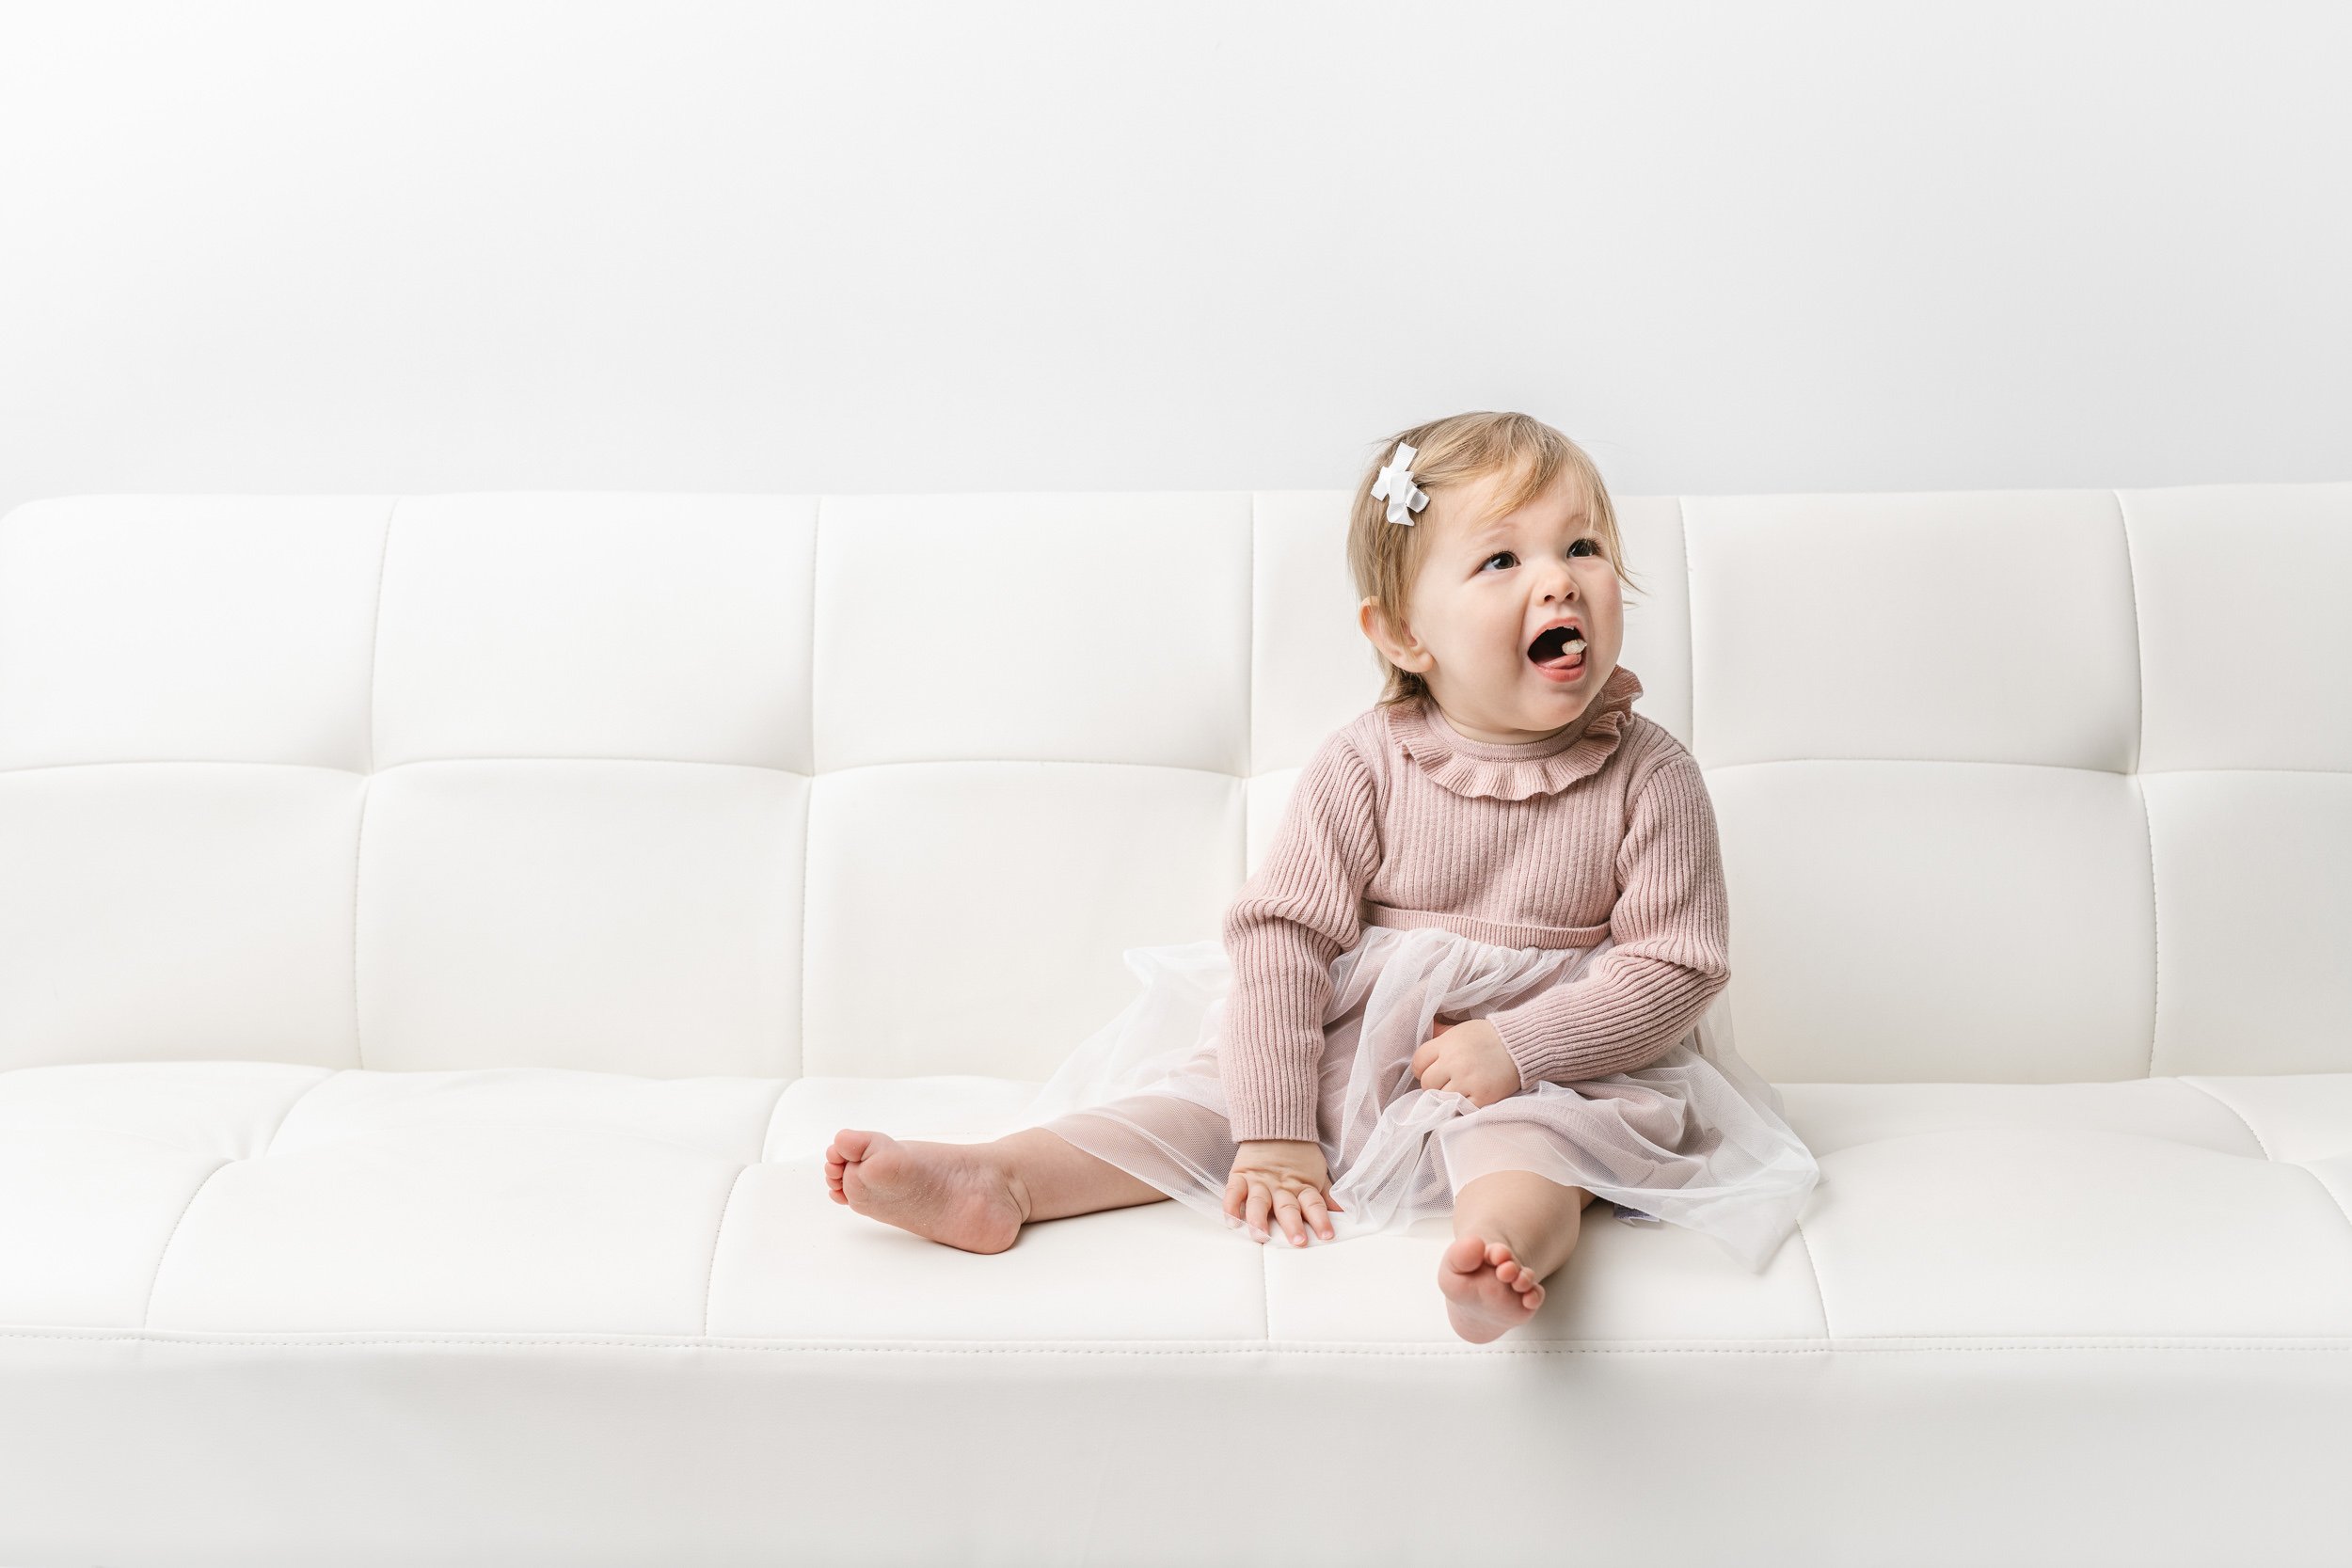   Baby studio photographer Nicole Hawkins Photography captures a baby sitting on a white couch and making silly faces. baby #NicoleHawkinsPhotography #NicoleHawkinsBabies #studiochildren #firstbirthday #studiophotography #girlsbirthdayportraits 